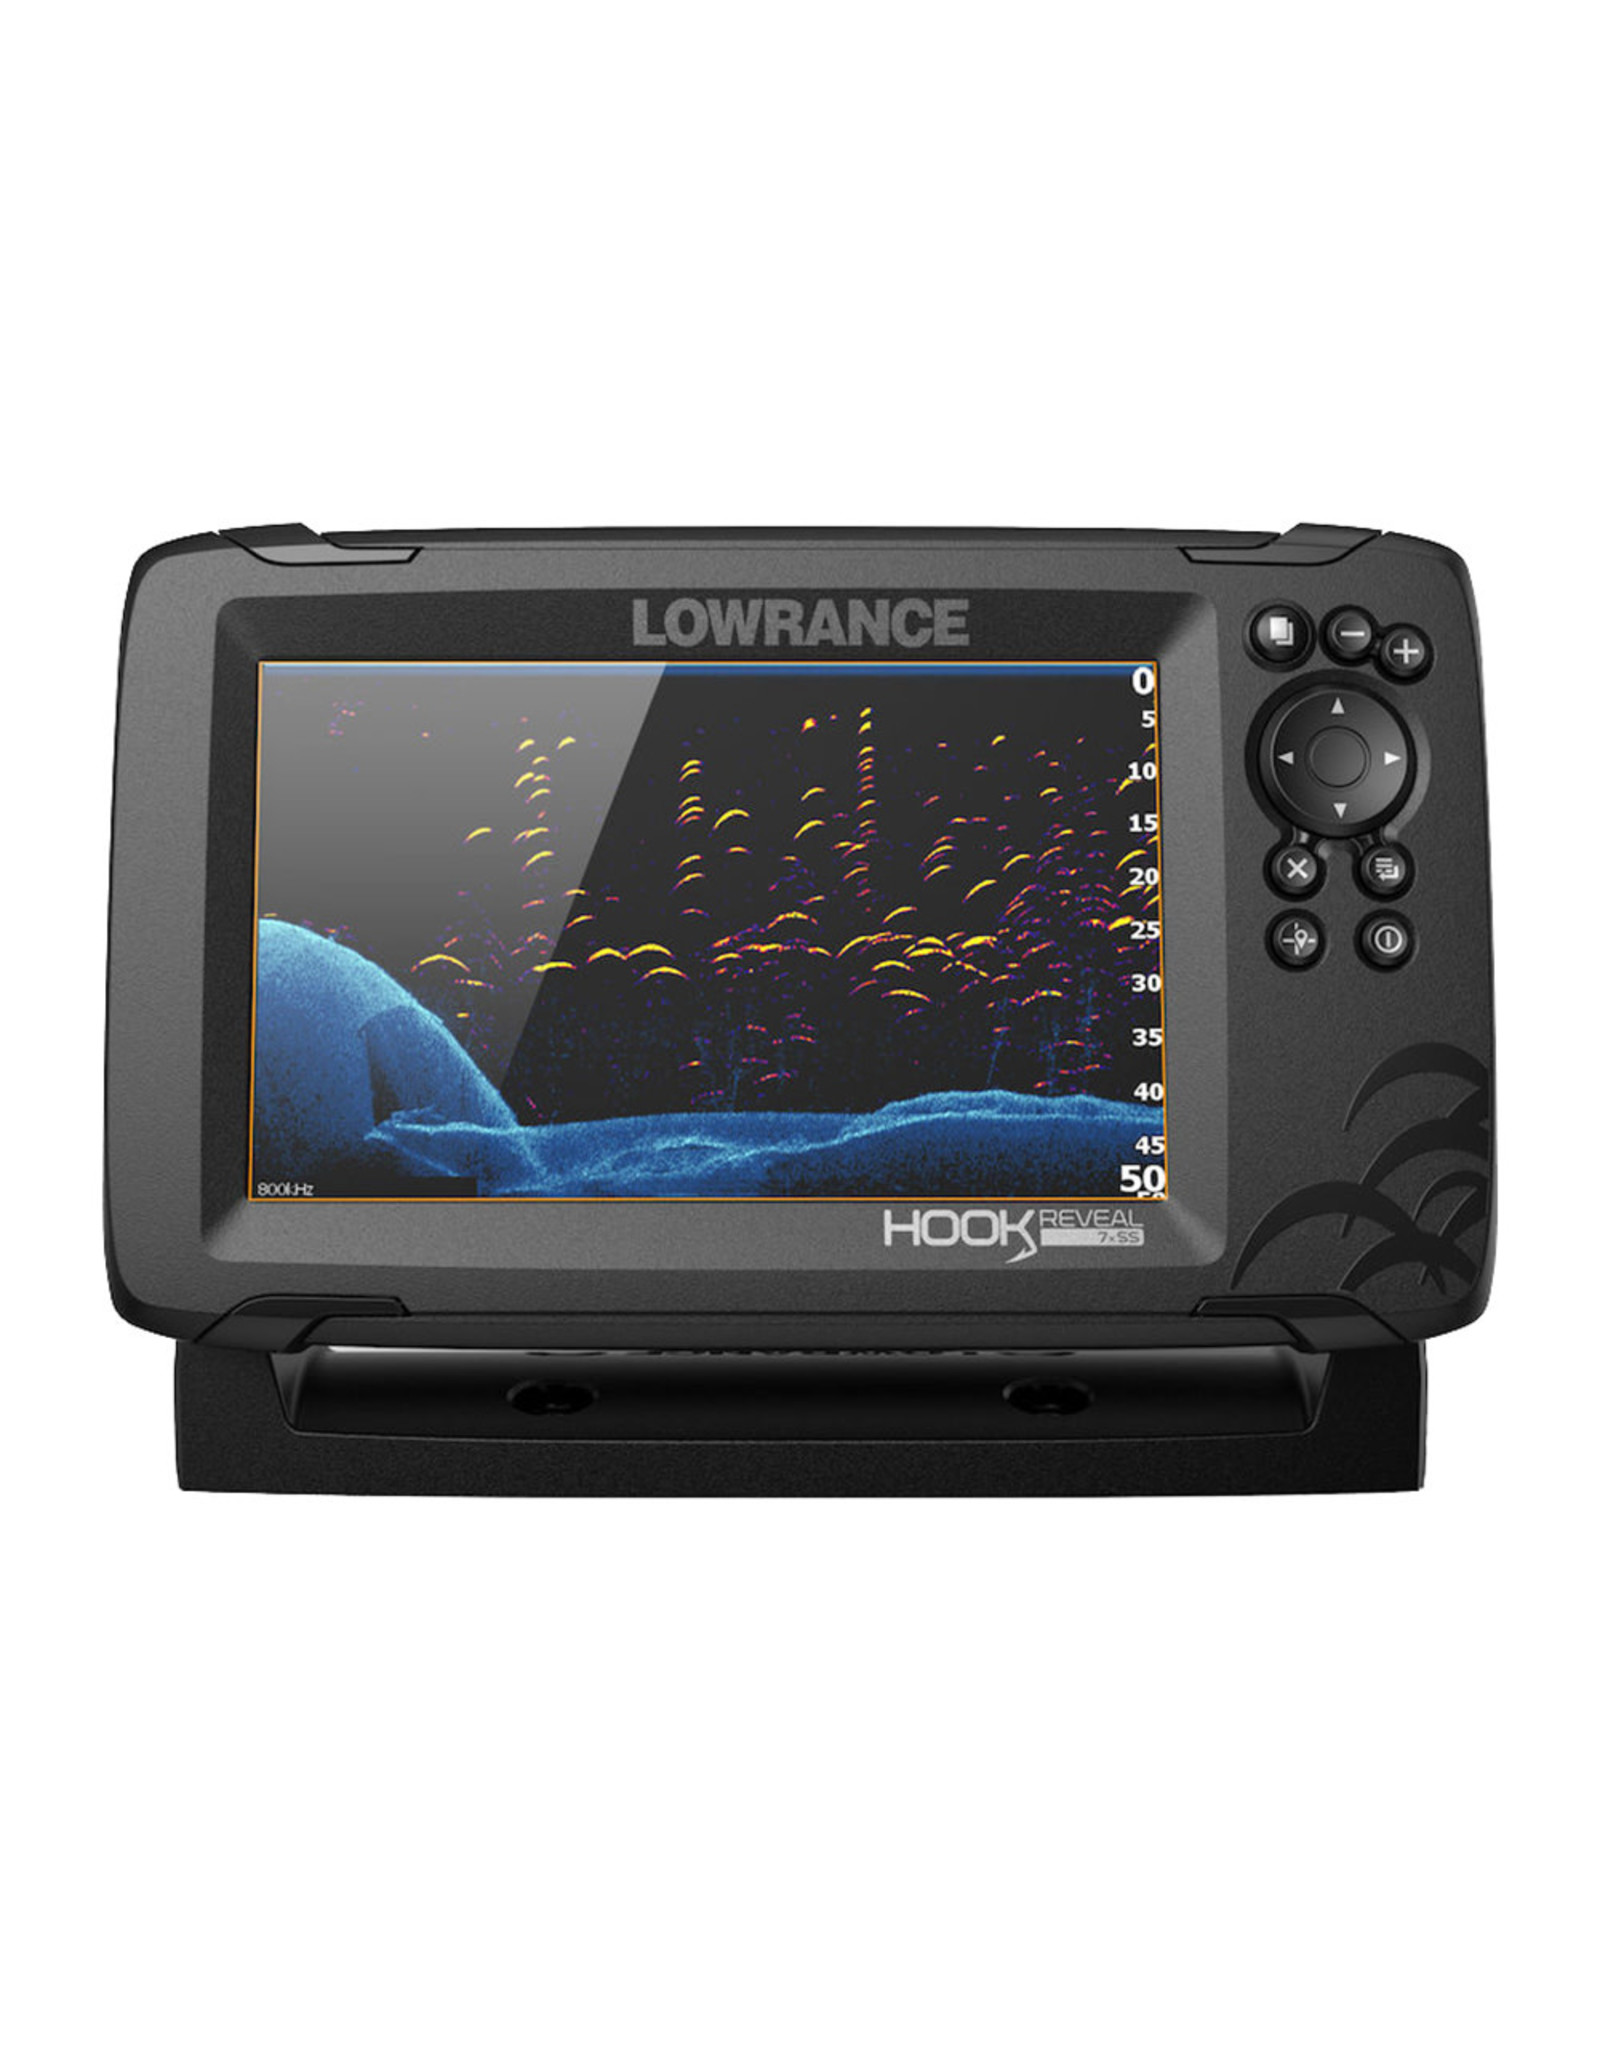 Lowrance HOOK Reveal 7x Fishfinder with SplitShot Transducer with Built-In GPS Trackplotter